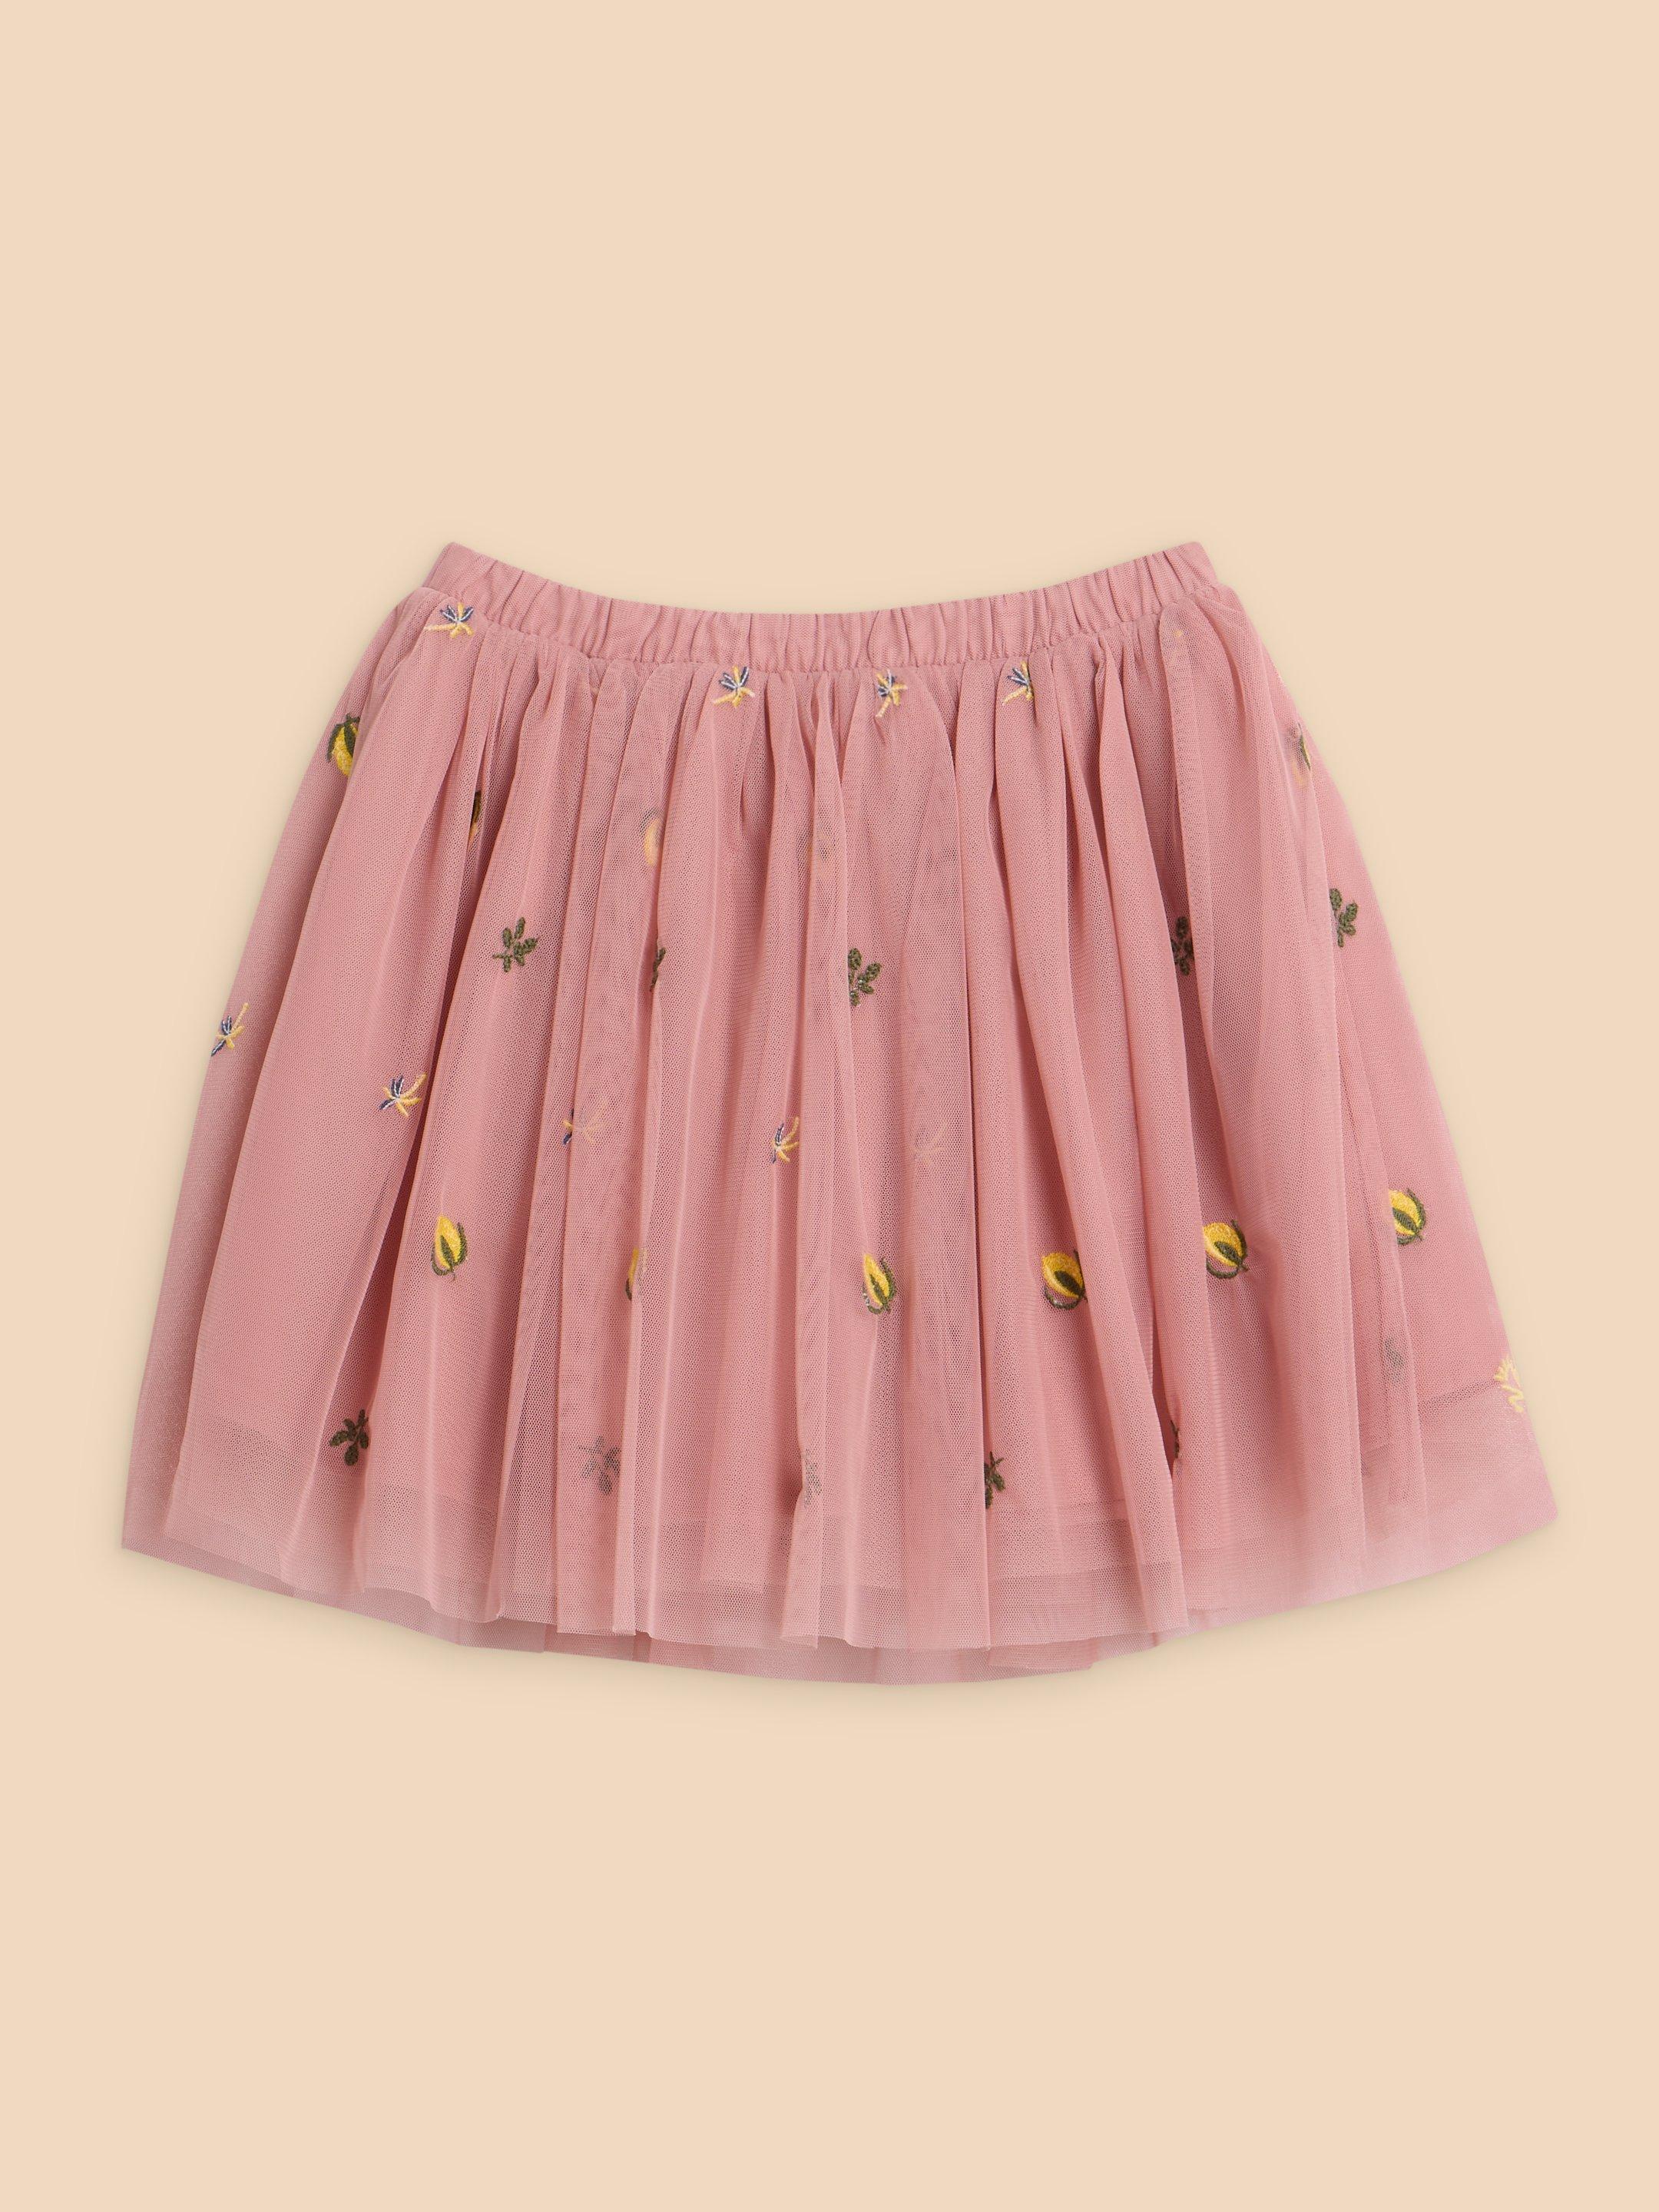 Embroidered Tuelle Skirt in LGT PINK - FLAT BACK